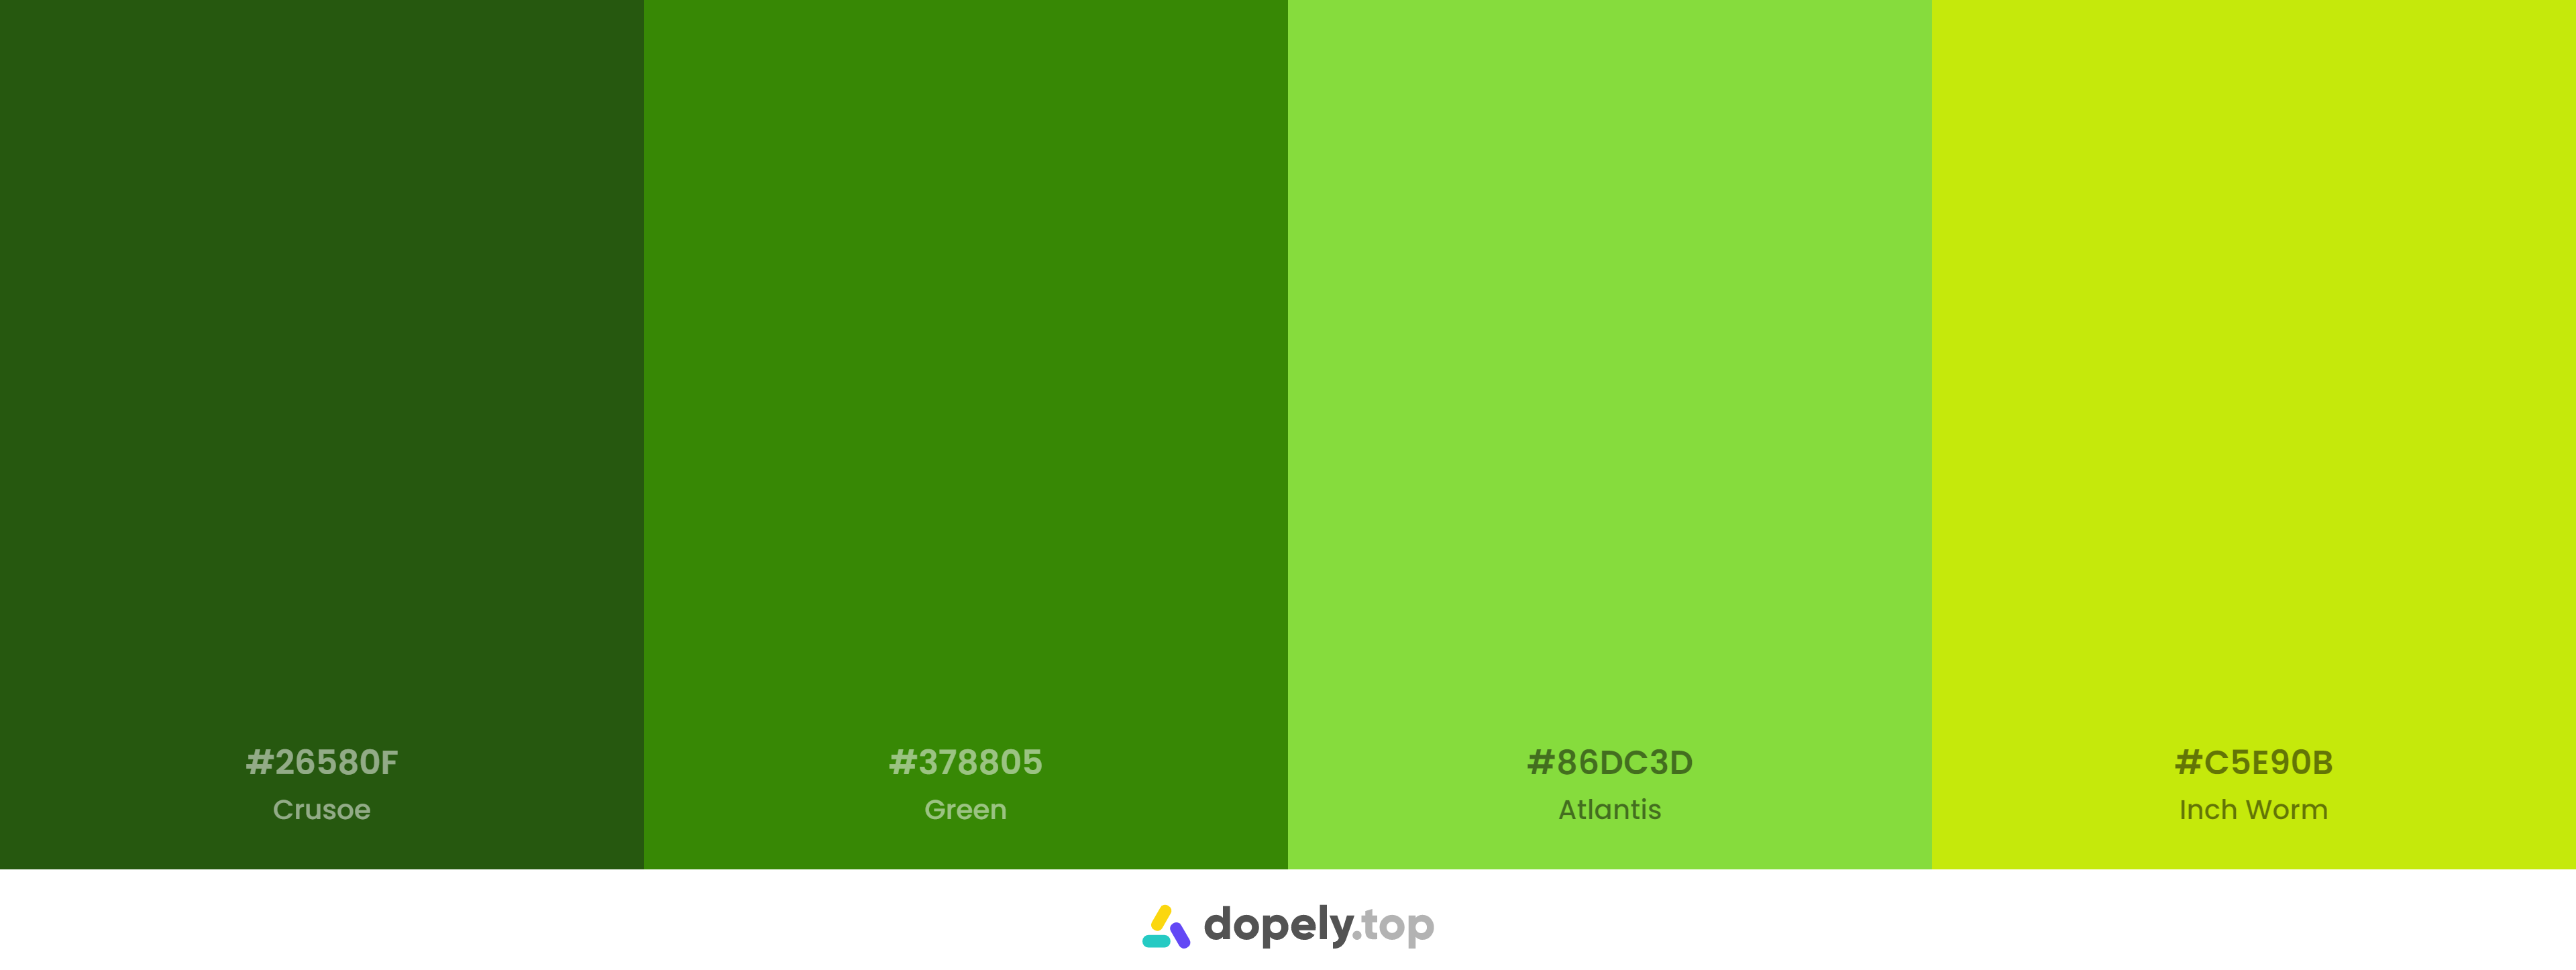 Green Color Palette Inspirations With Names Hex Codes Inside Colors ...